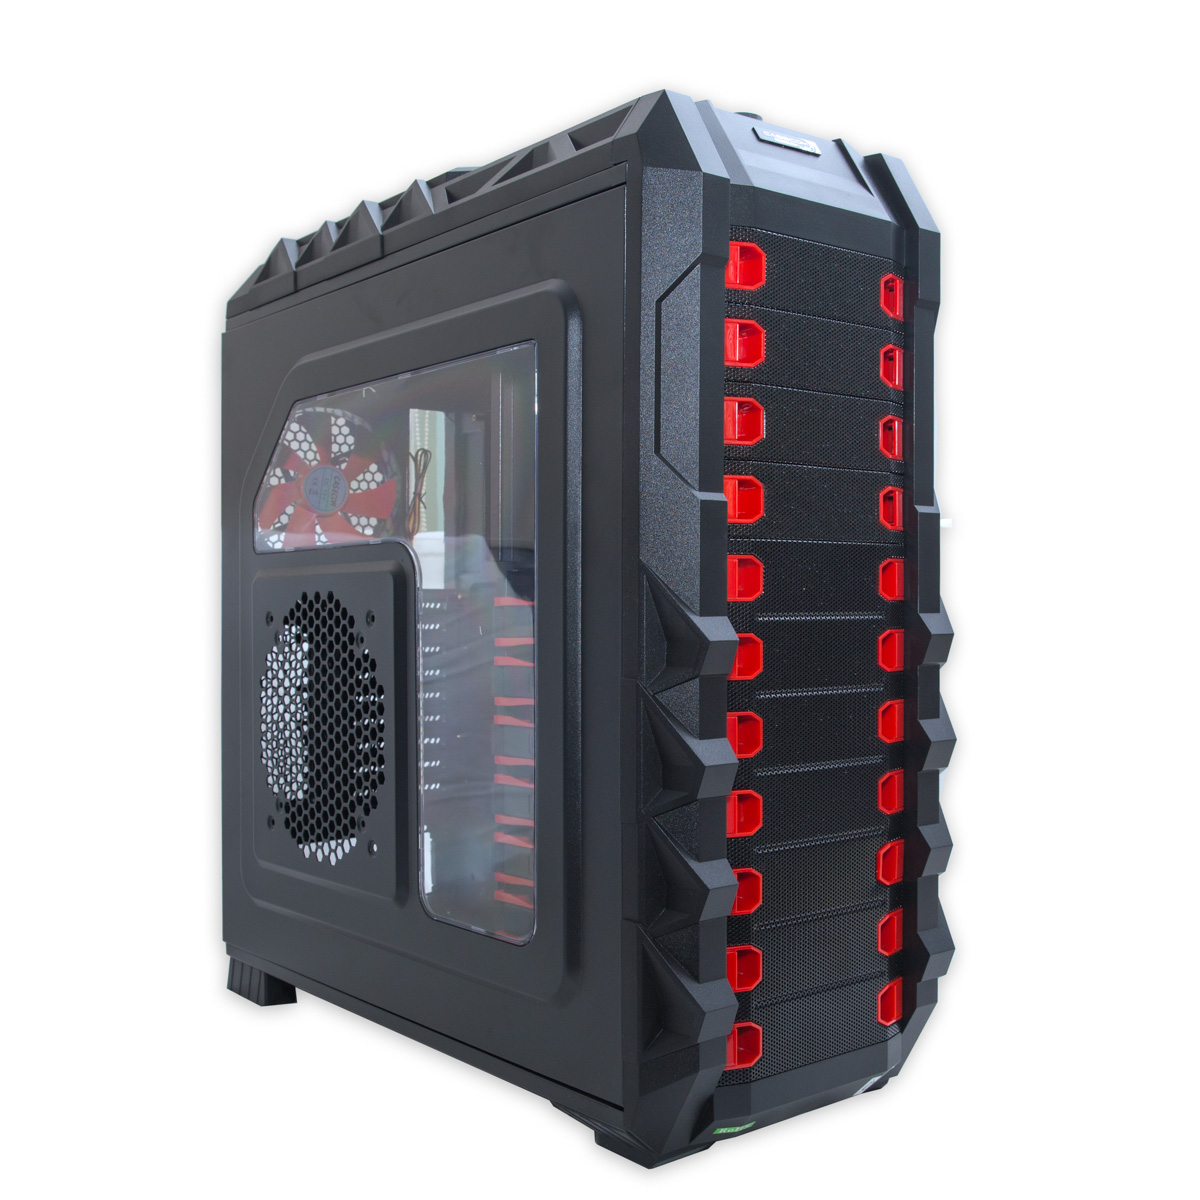 Rosewill THOR V2 Gaming ATX Full Tower Computer Case, support up to E ATX / XL ATX, come with Four Fans   1 x Front Red LED 230mm Fan, 1 x Top 230mm Fan, 1 x Side 230mm Fan, 1 x Rear 140mm Fan Retail